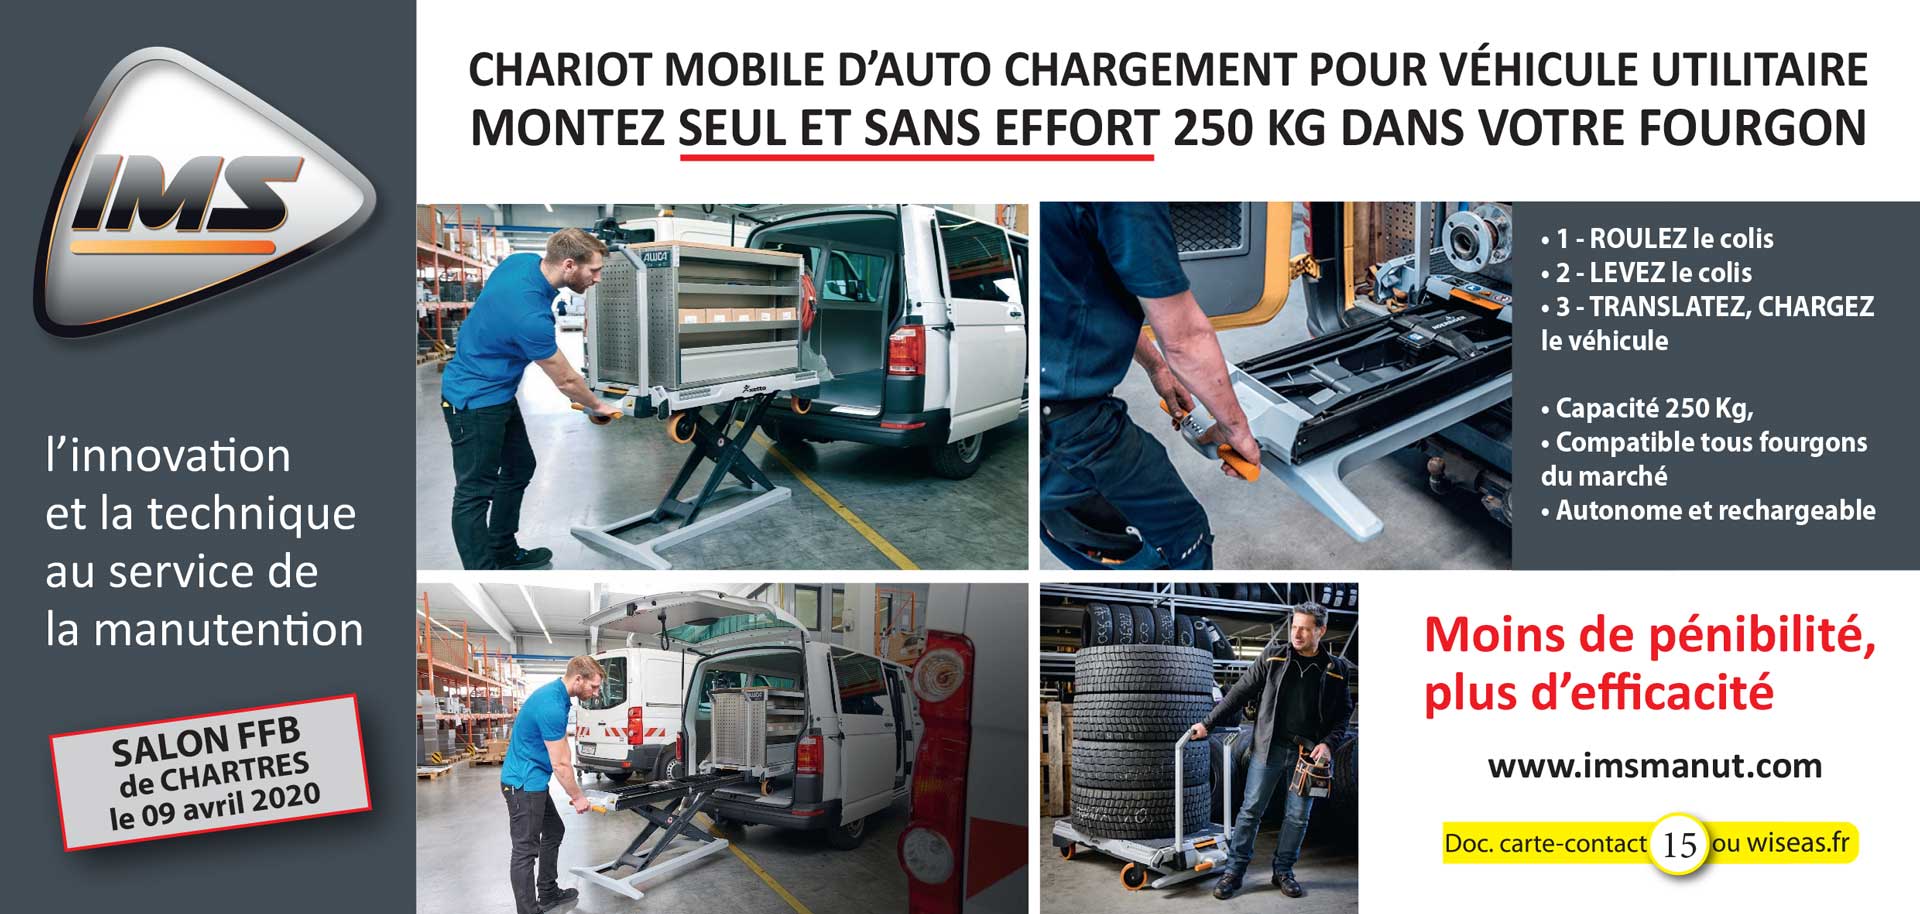 Chariot auto-chargement